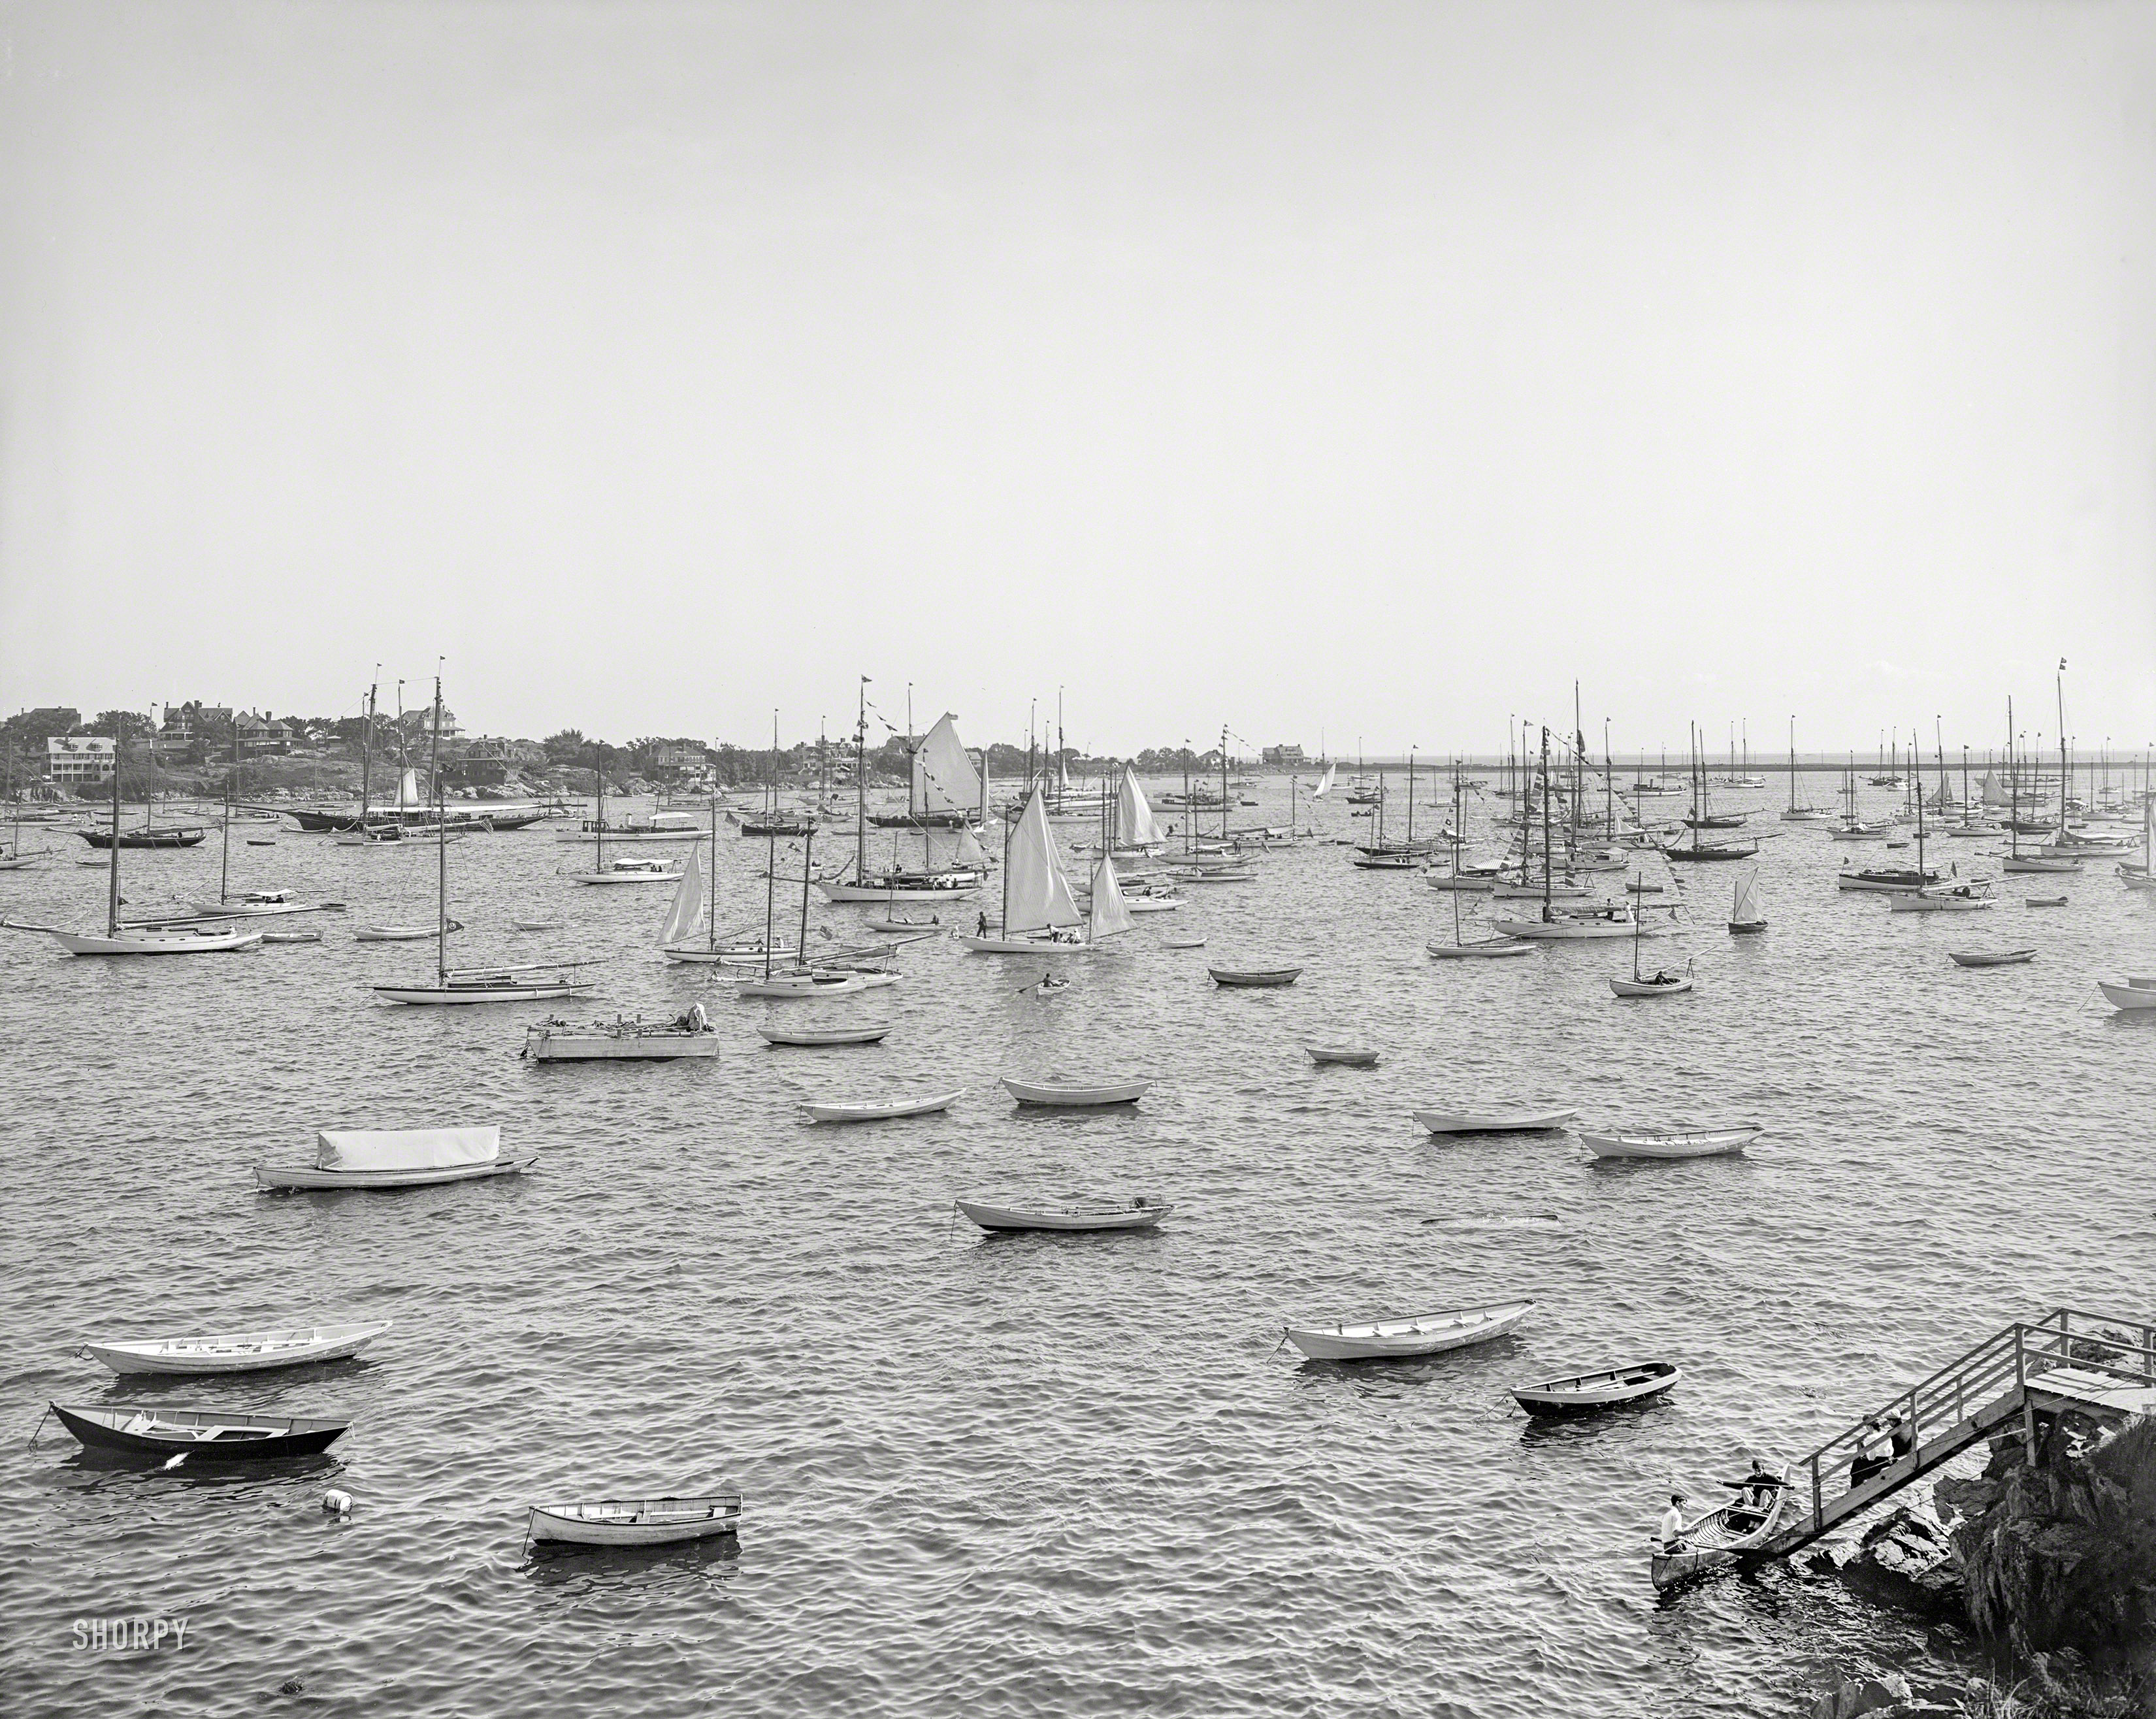 Circa 1906. "Harbor from Crocker Park, Marblehead, Massachusetts." 8x10 inch dry plate glass negative, Detroit Publishing Company. View full size.